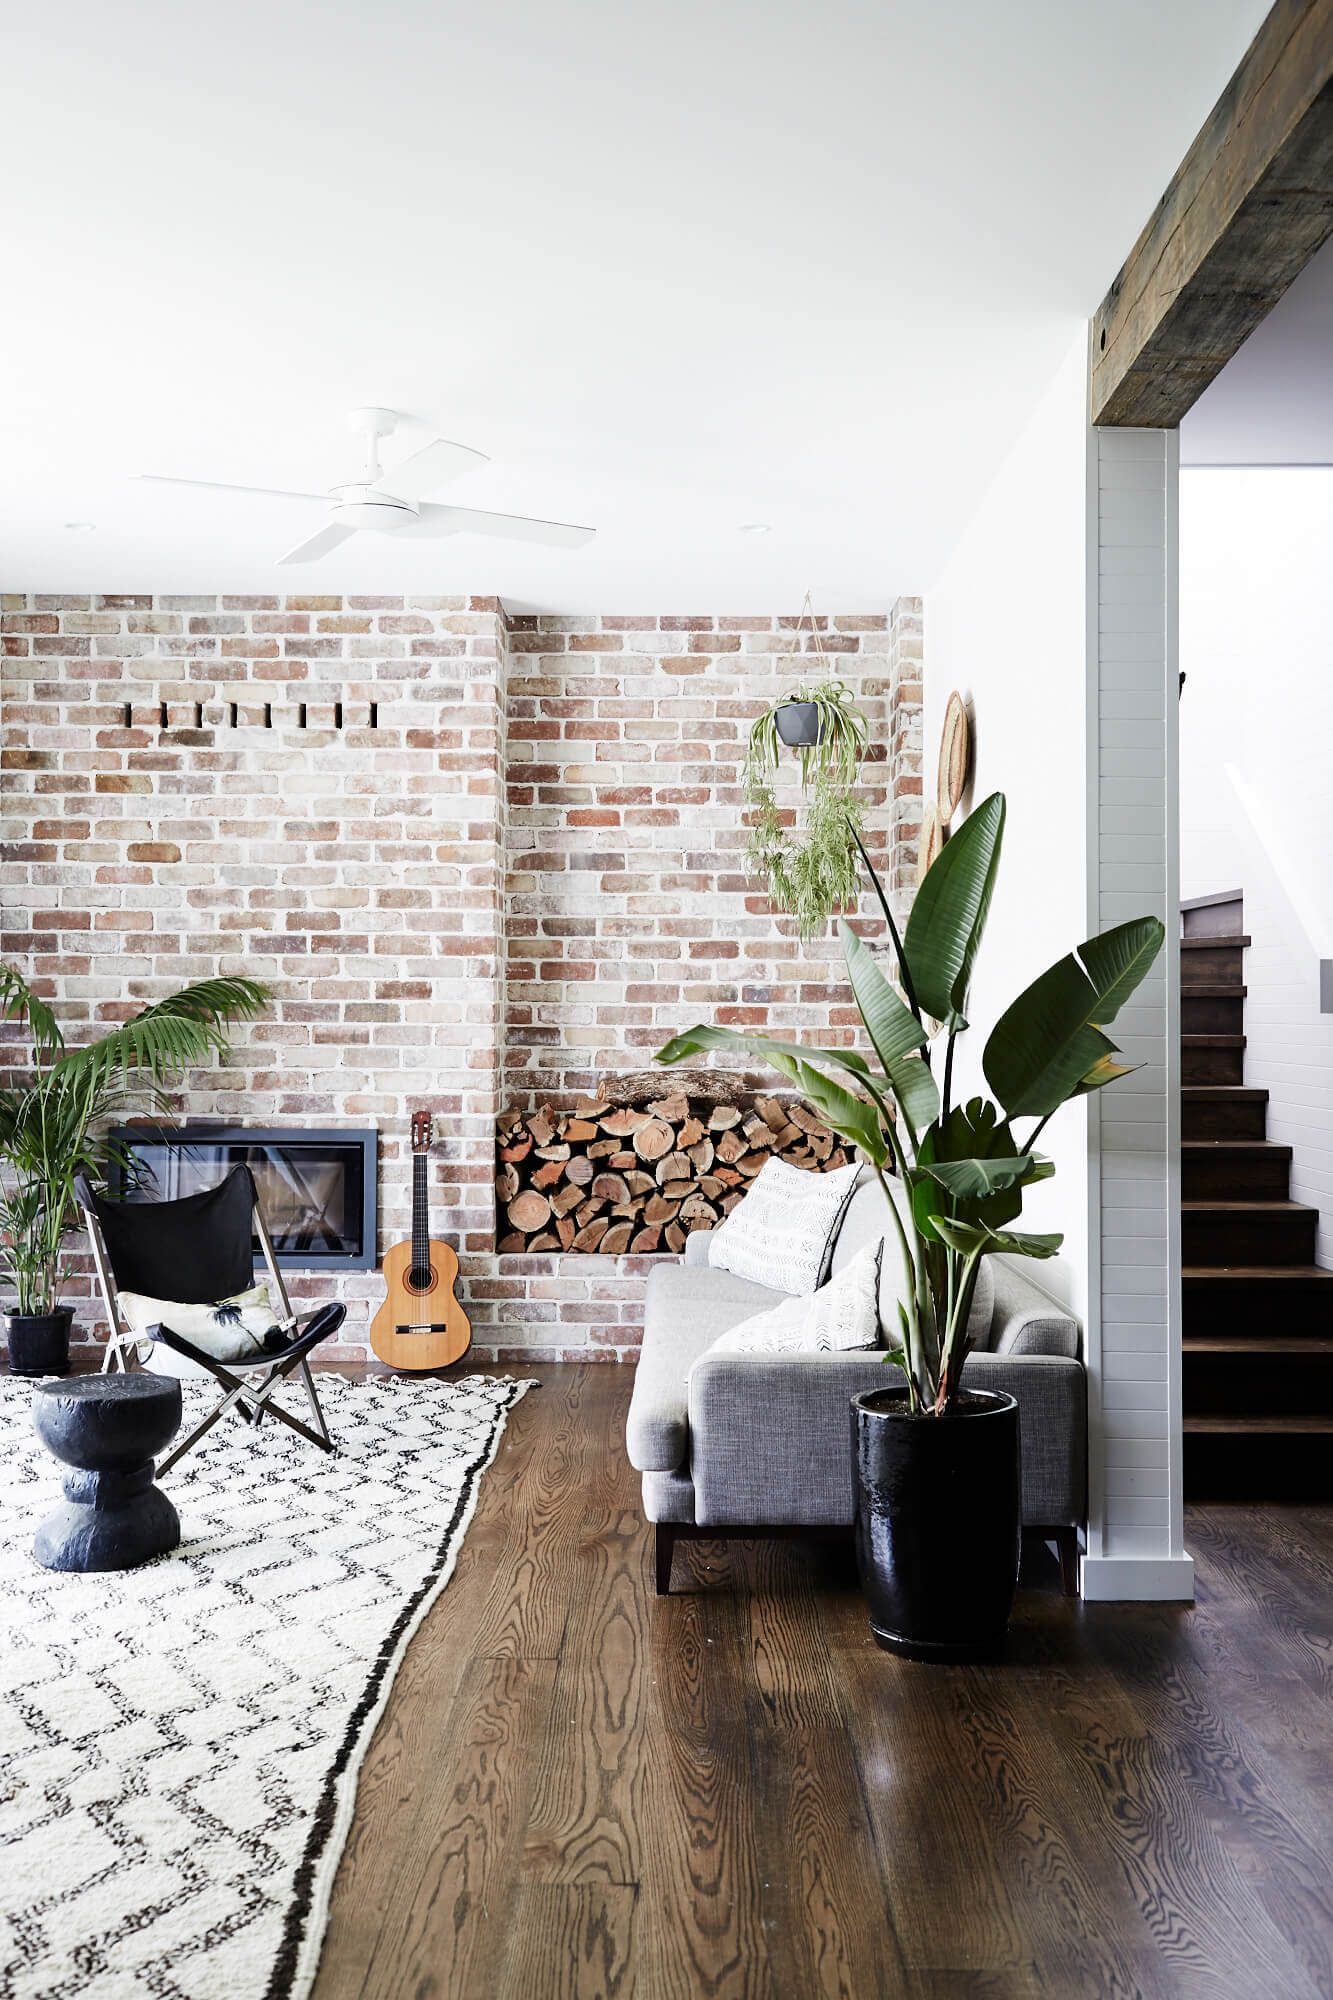 Lounge room at Magnolia House, Byron Beach Abodes with exposed brick wall, fireplace and textured rug and furnishings